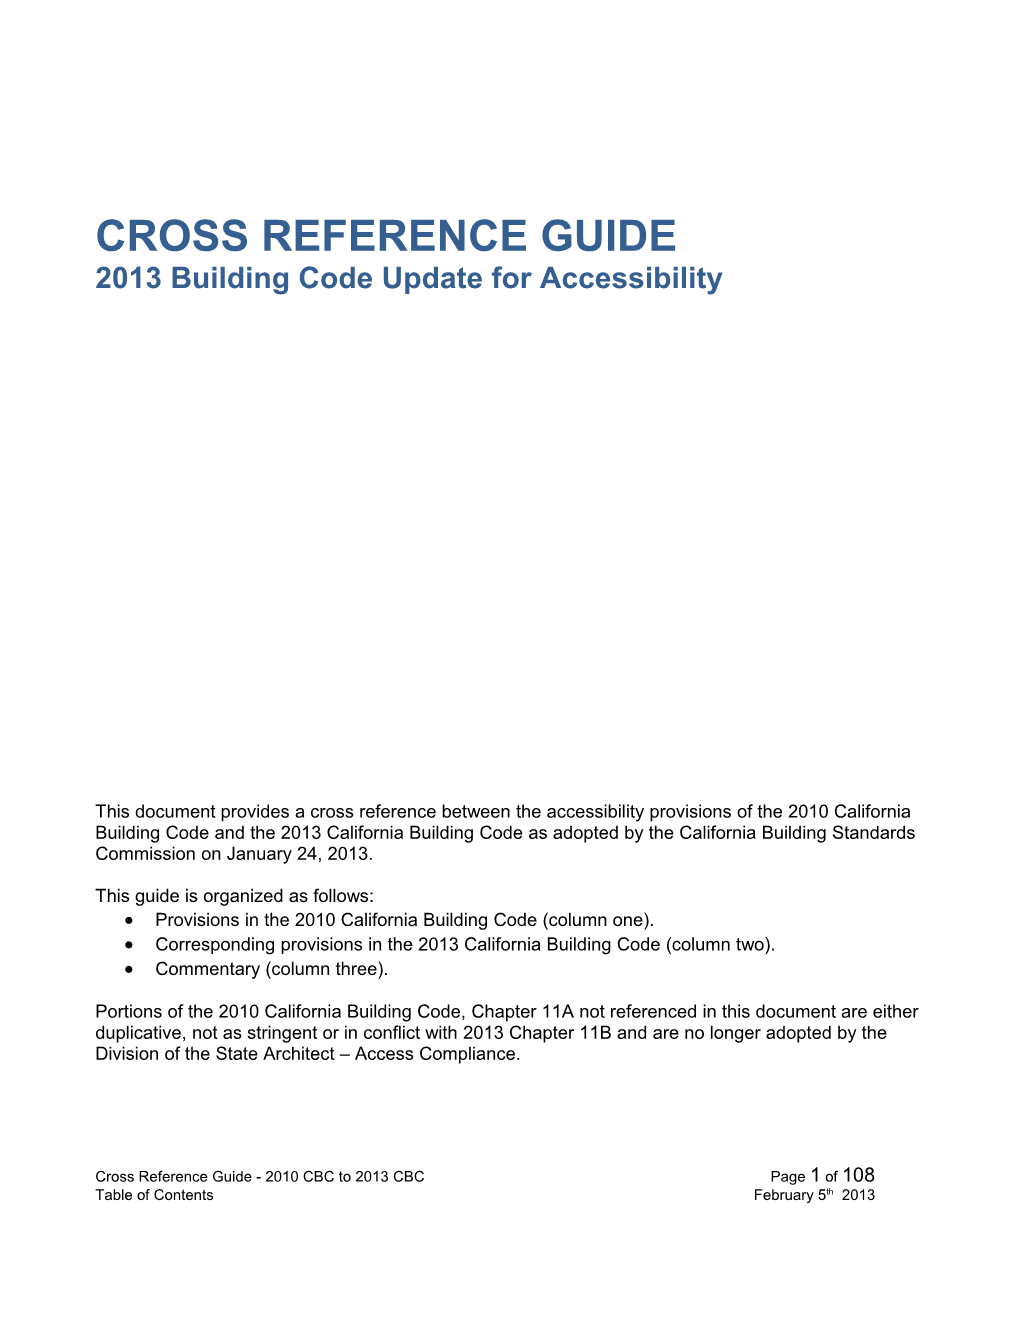 Cross Reference Guide2013 Building Code Update for Accessibility